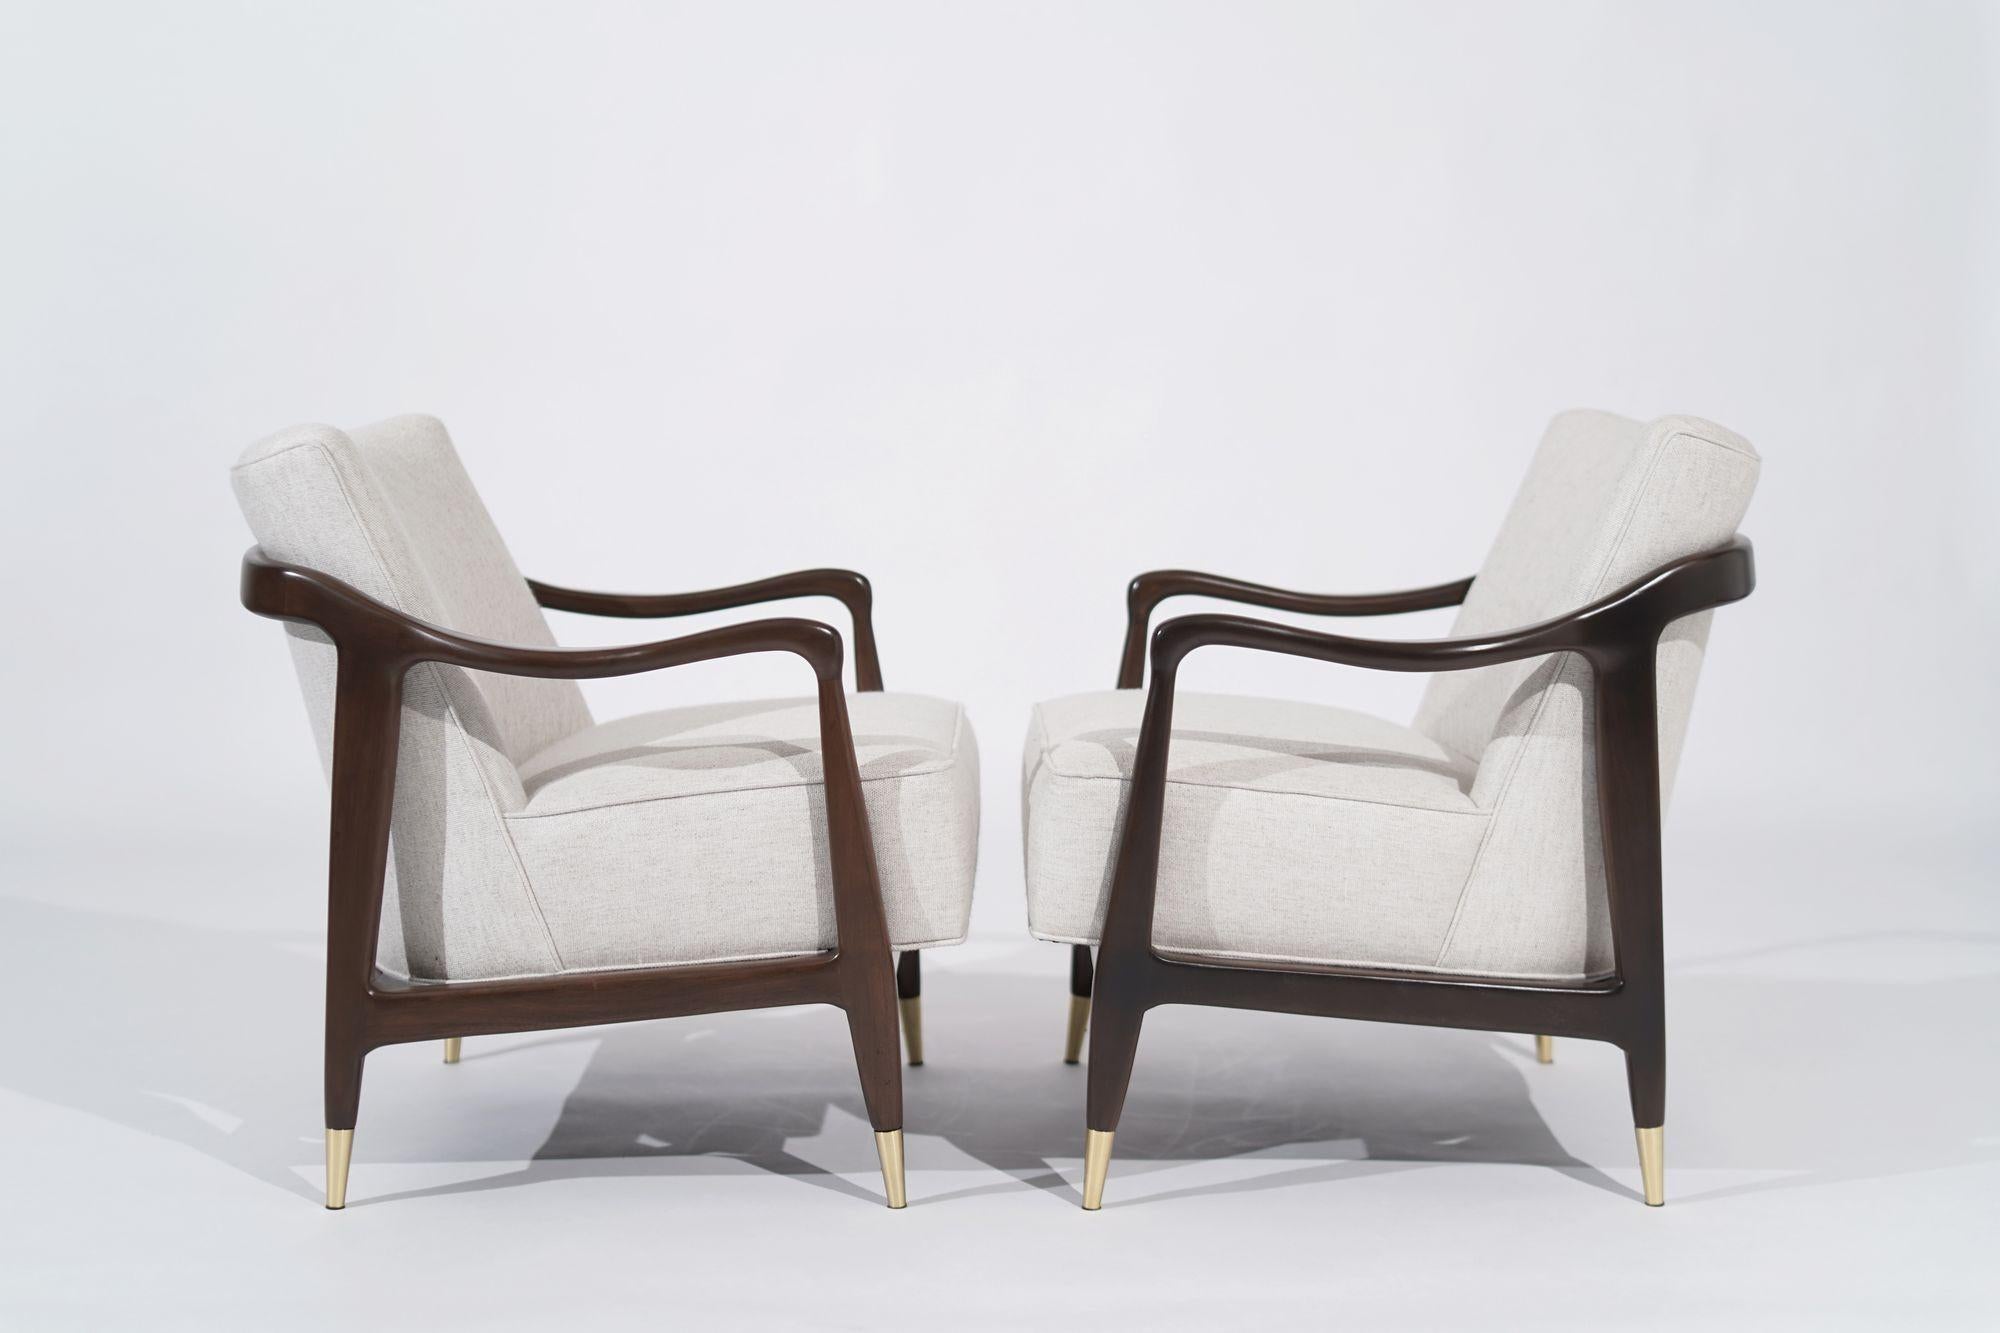 Elevate your space this vintage set of chairs in Gio Ponti's iconic 1950s style, exuding timeless elegance and mid-century modern flair. Meticulously crafted with sleek lines and brass sabots for durability, these chairs blend vintage charm with